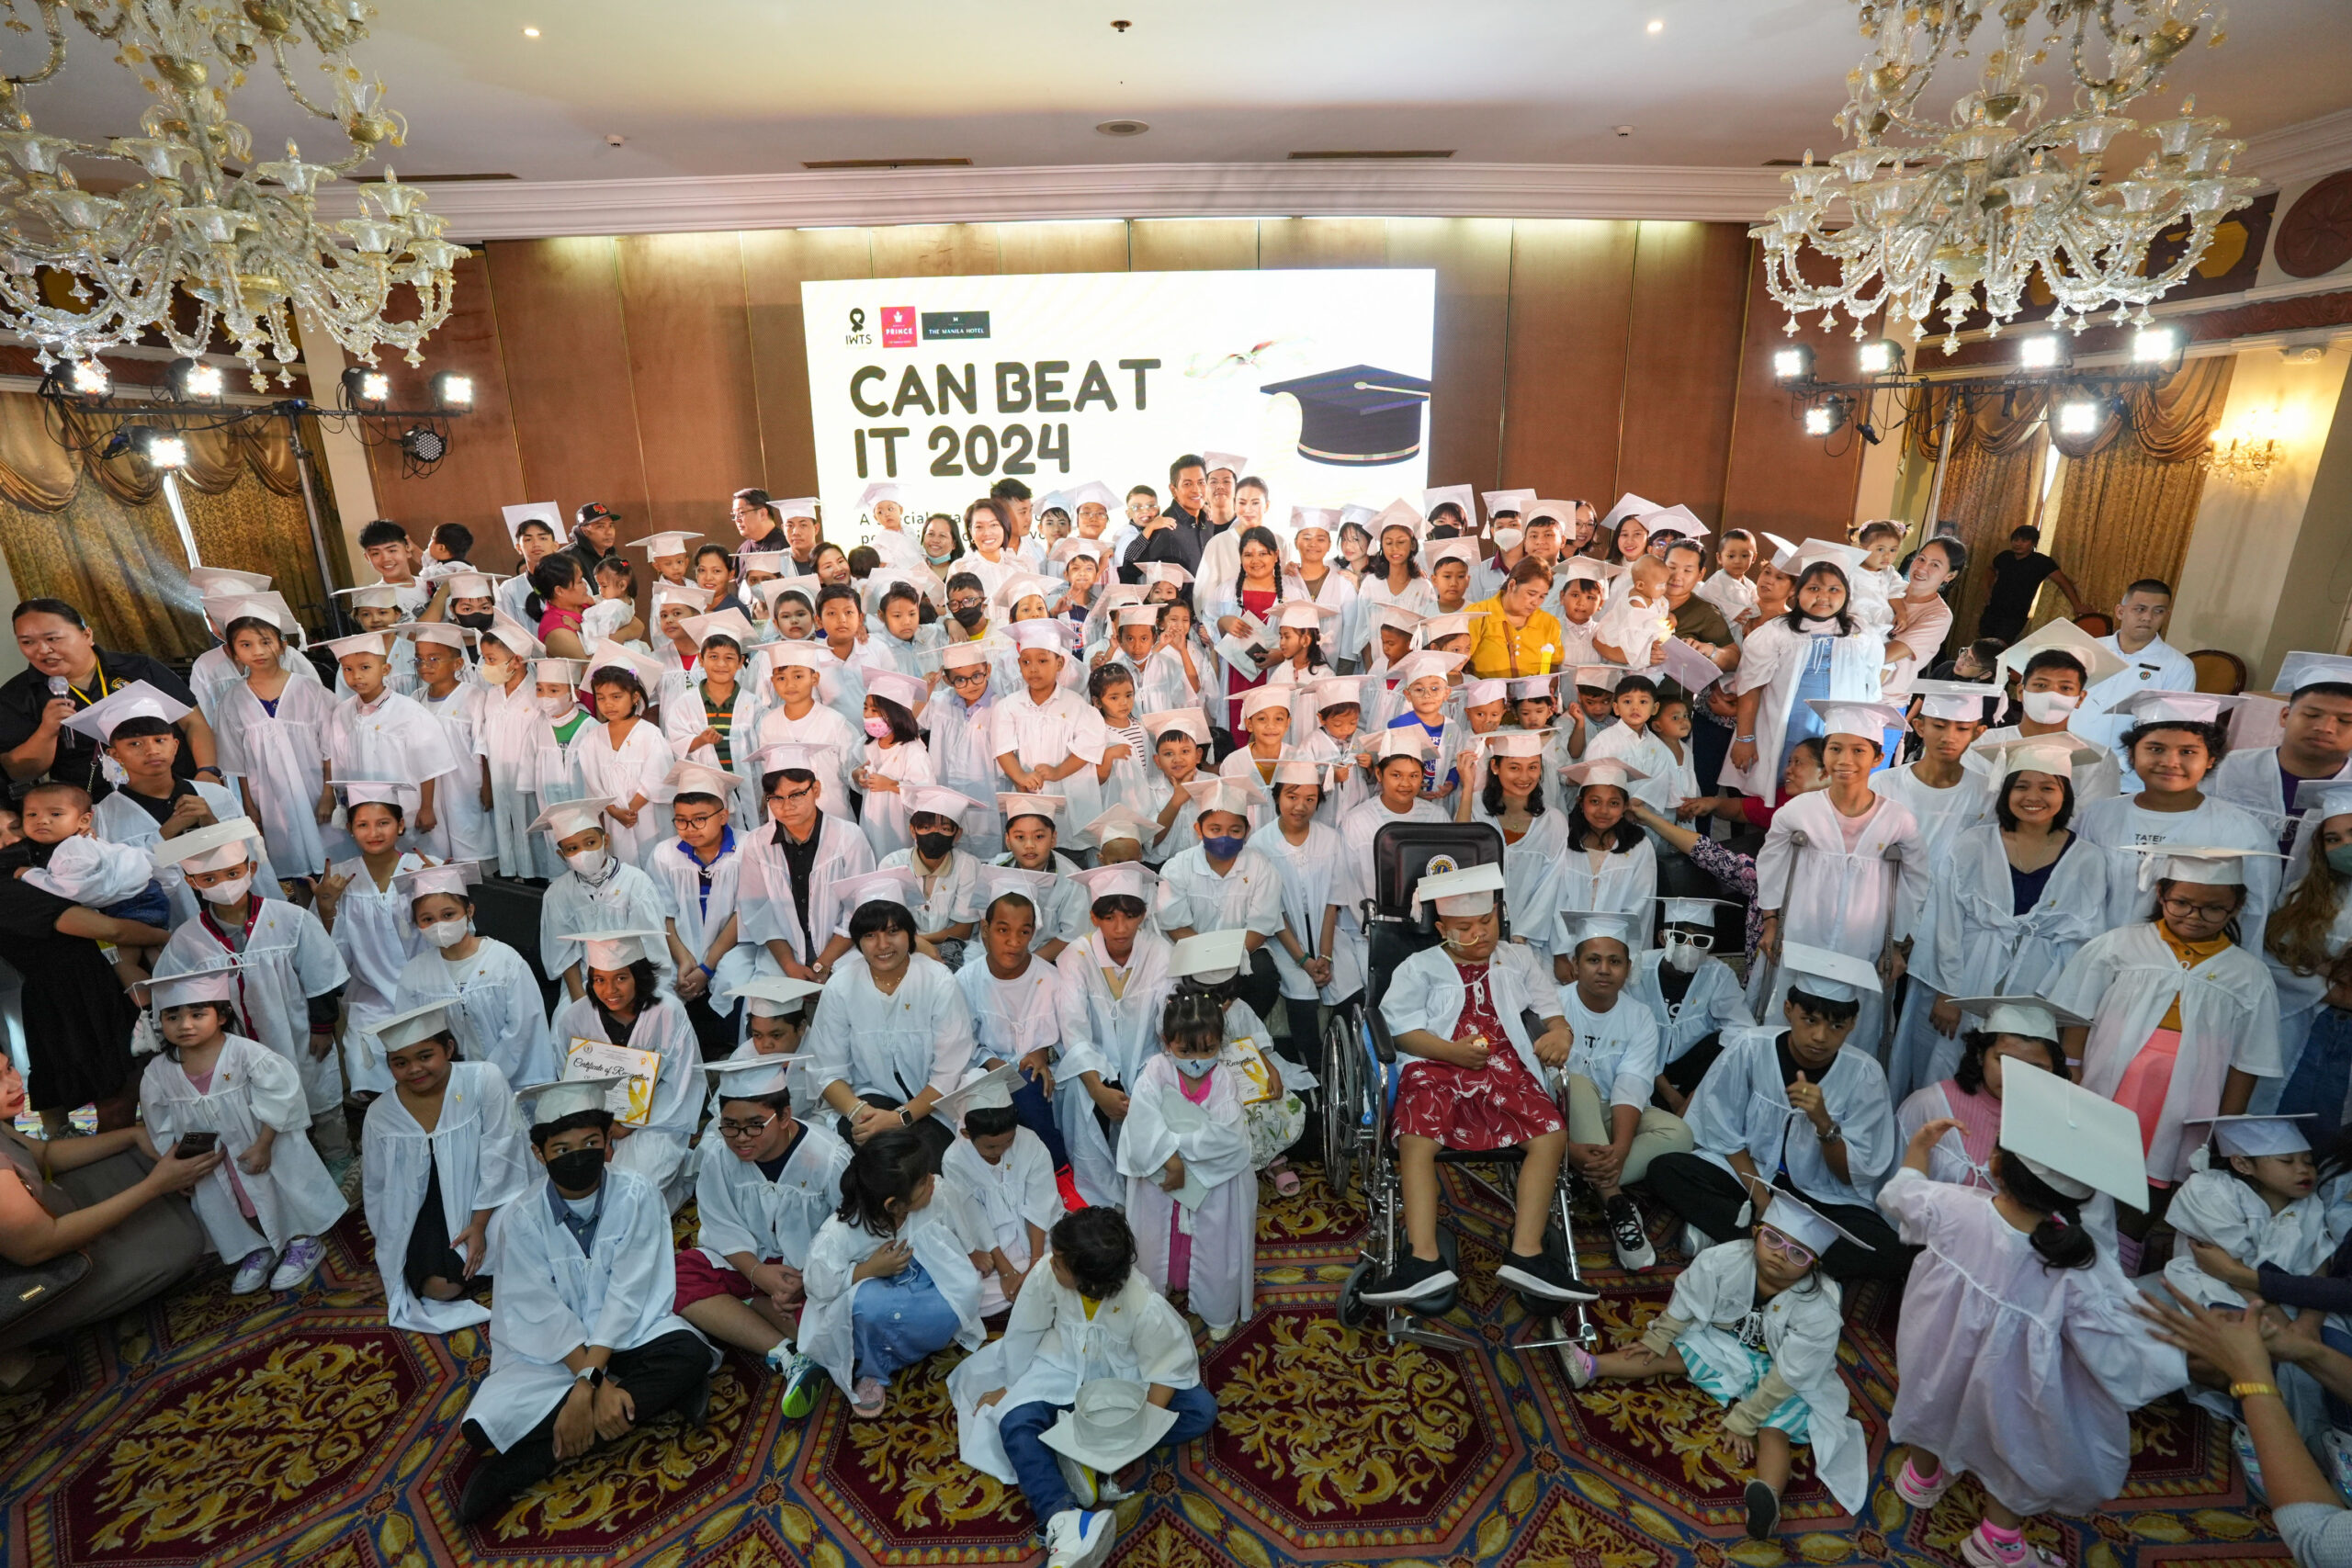 CAn BEAT IT: 150 STORIES OF COURAGE AND TRIUMPH I Want To  Share Foundation’s Ceremony Celebrate Victory of Pediatric Cancer Patients